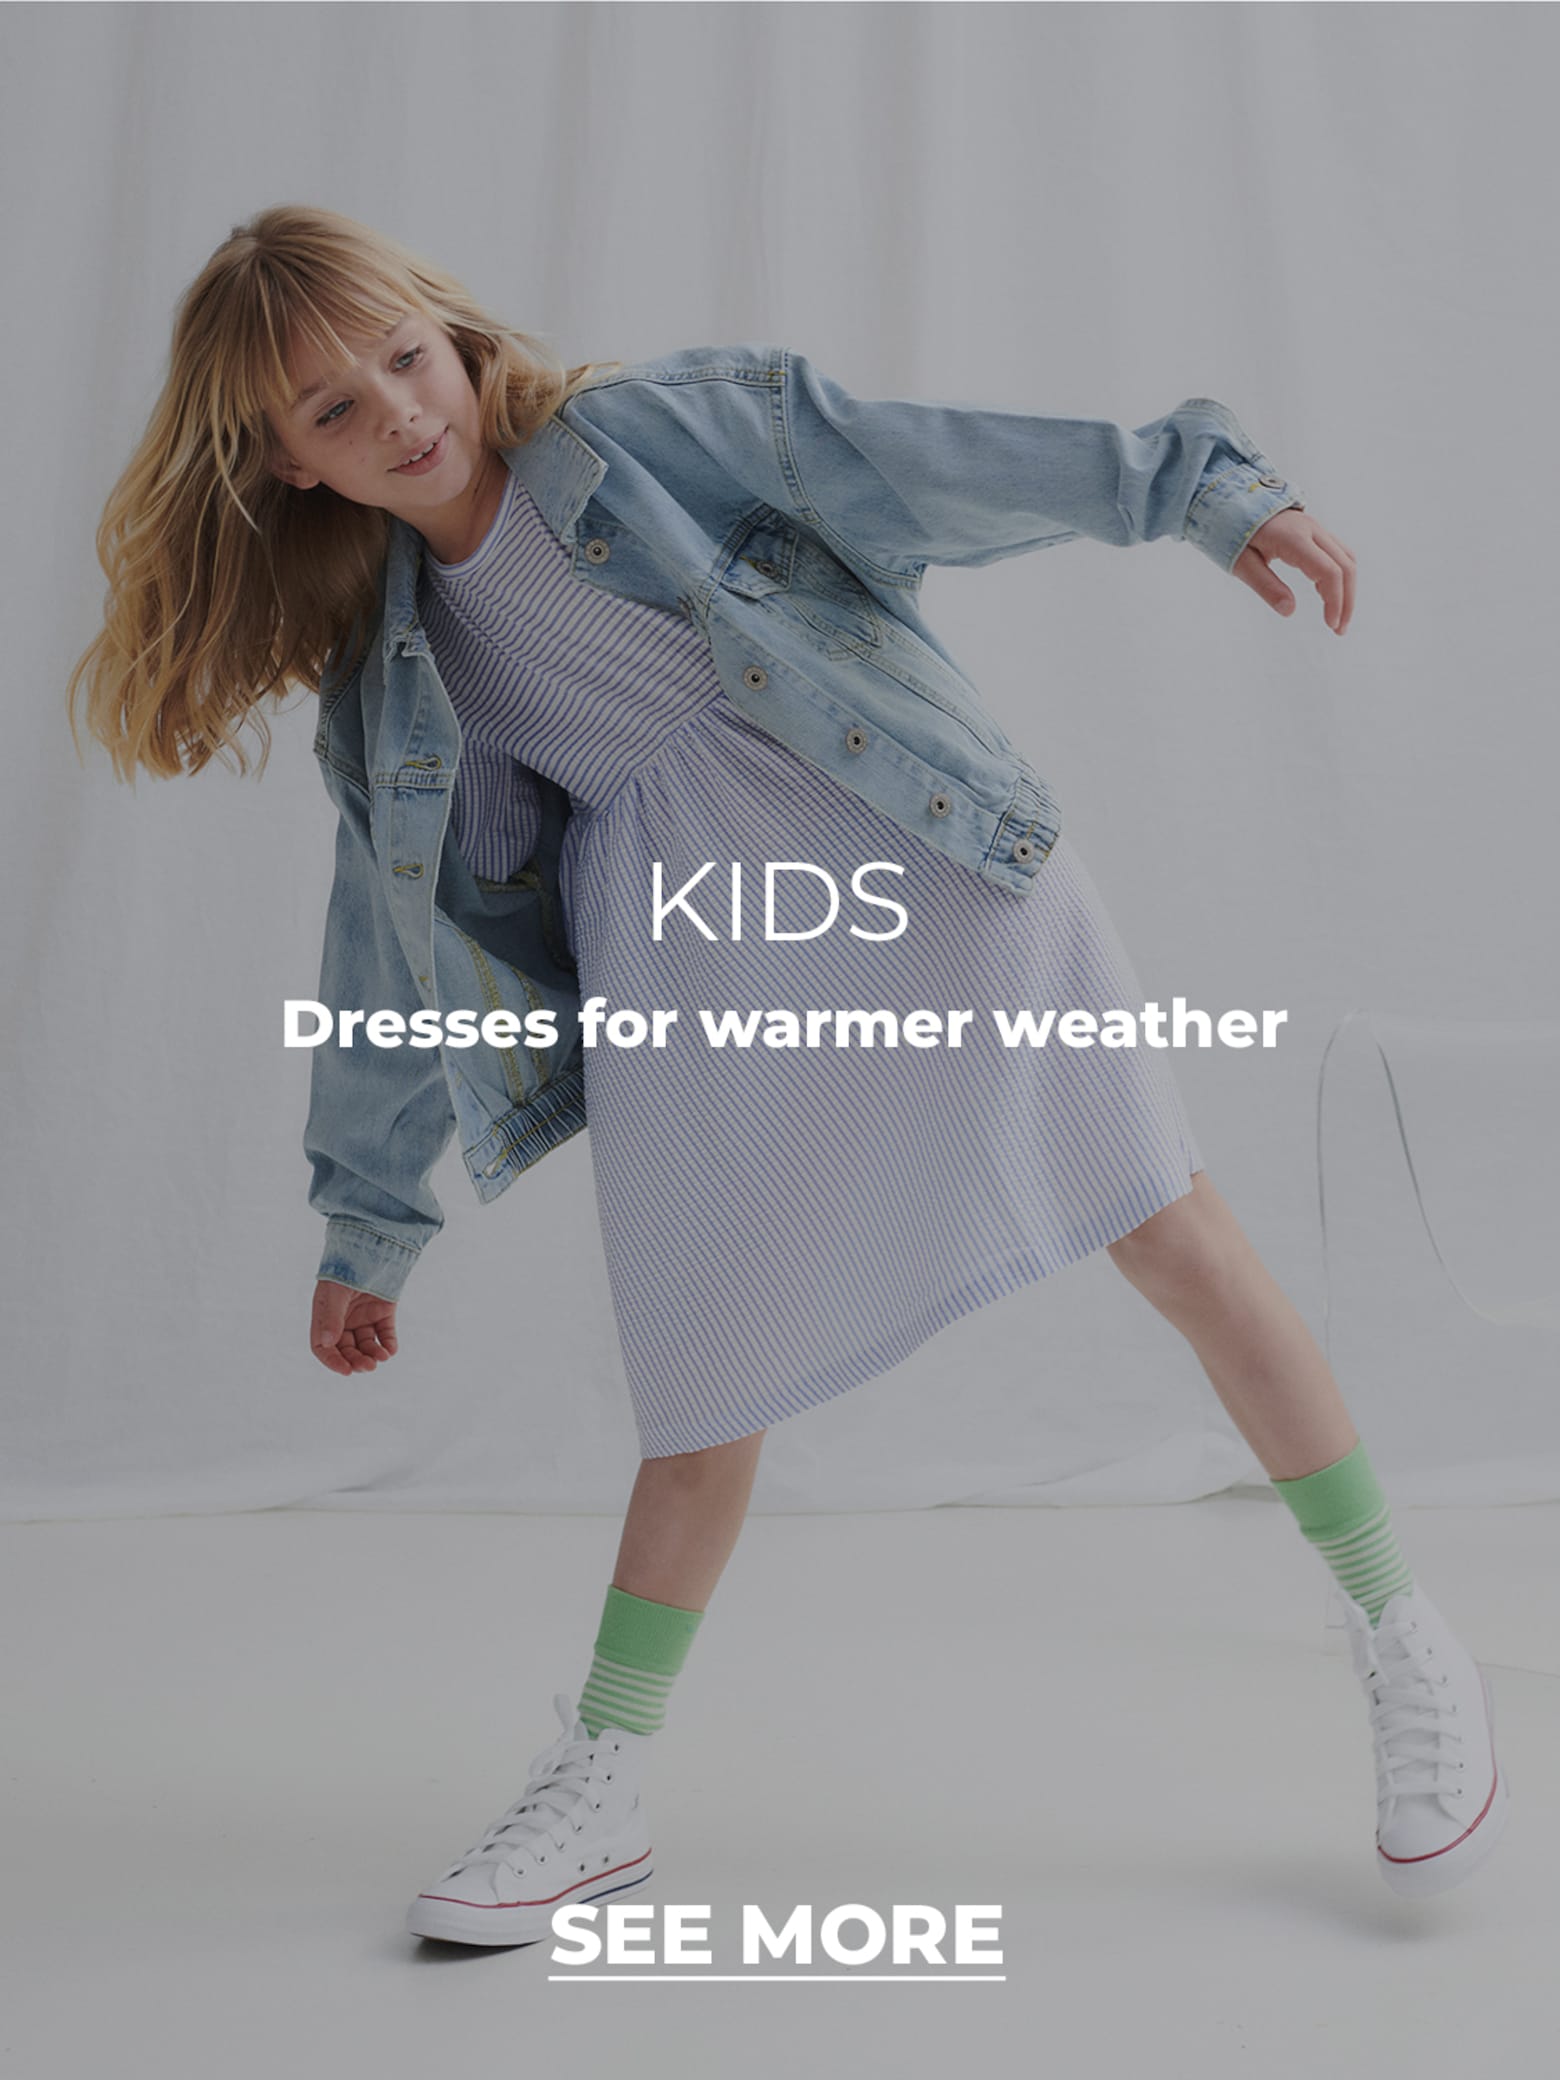 Fresh styles for girls Clothing for warmer weather